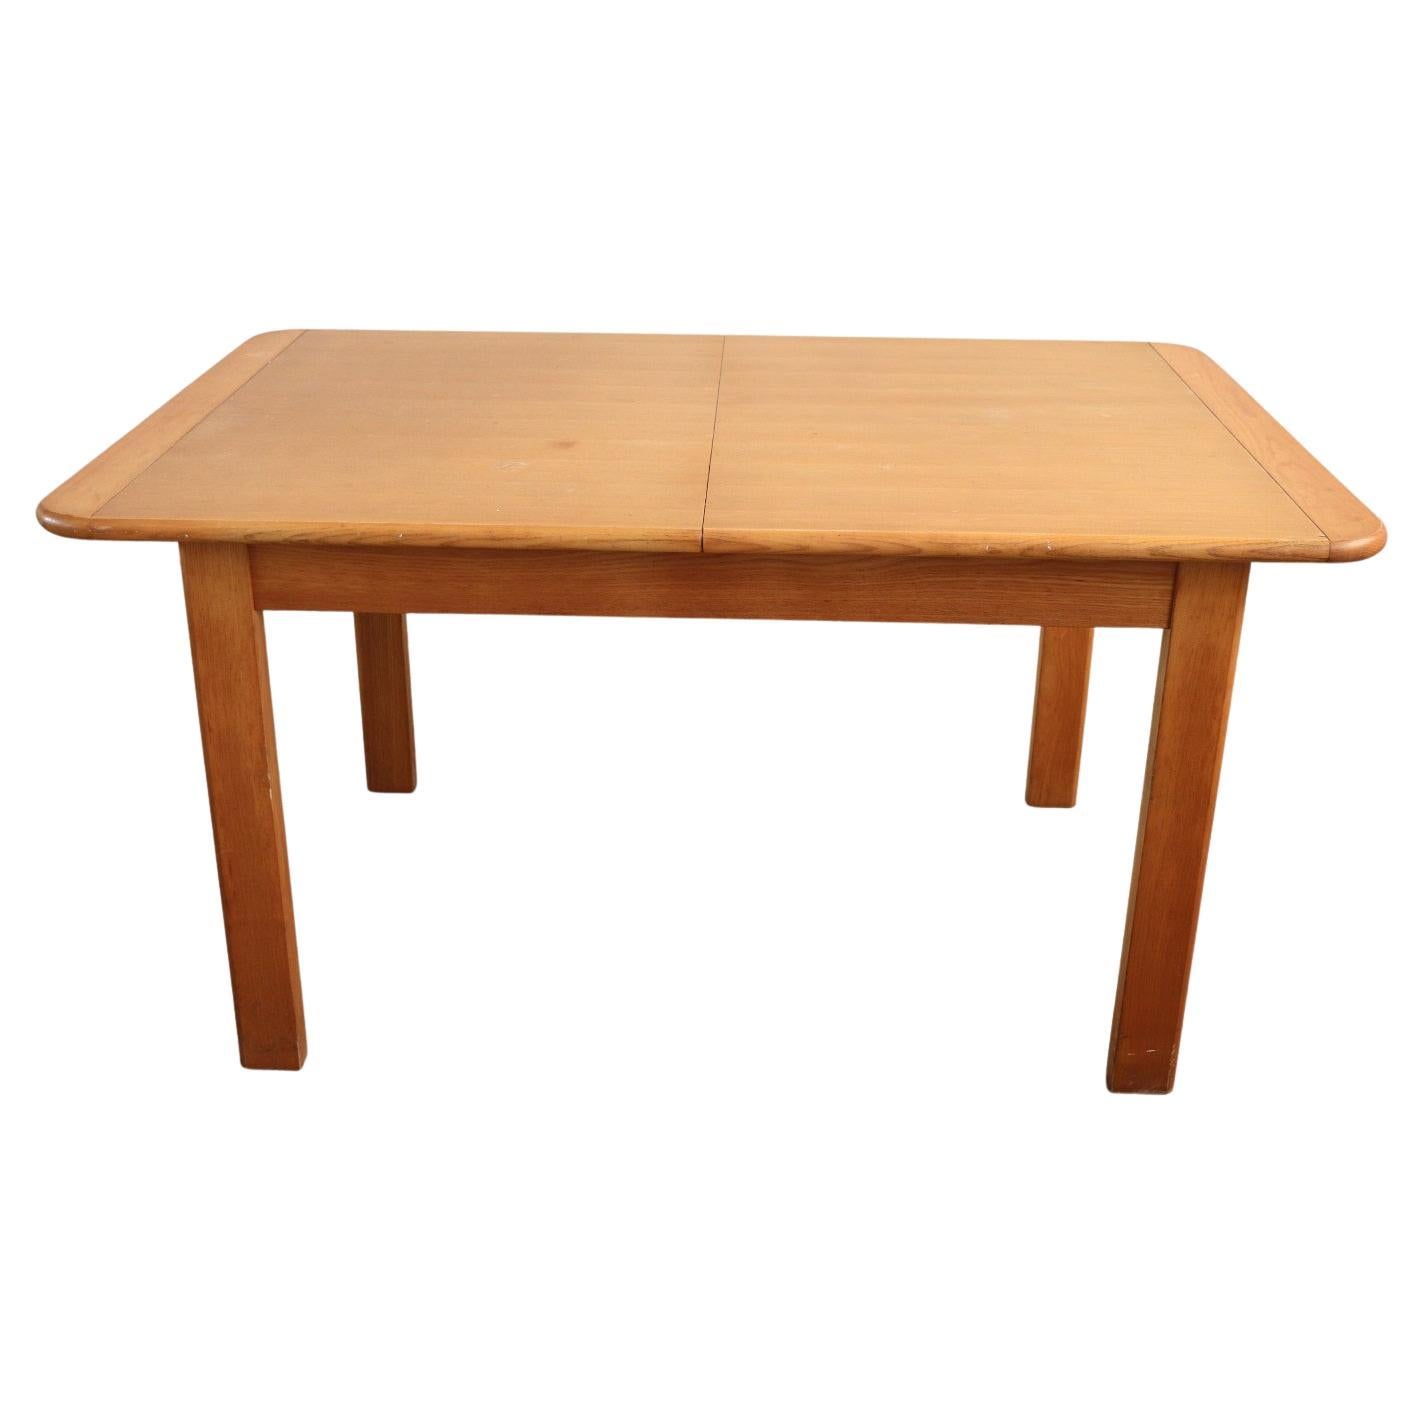 Swedish Design Extendable Dining Table